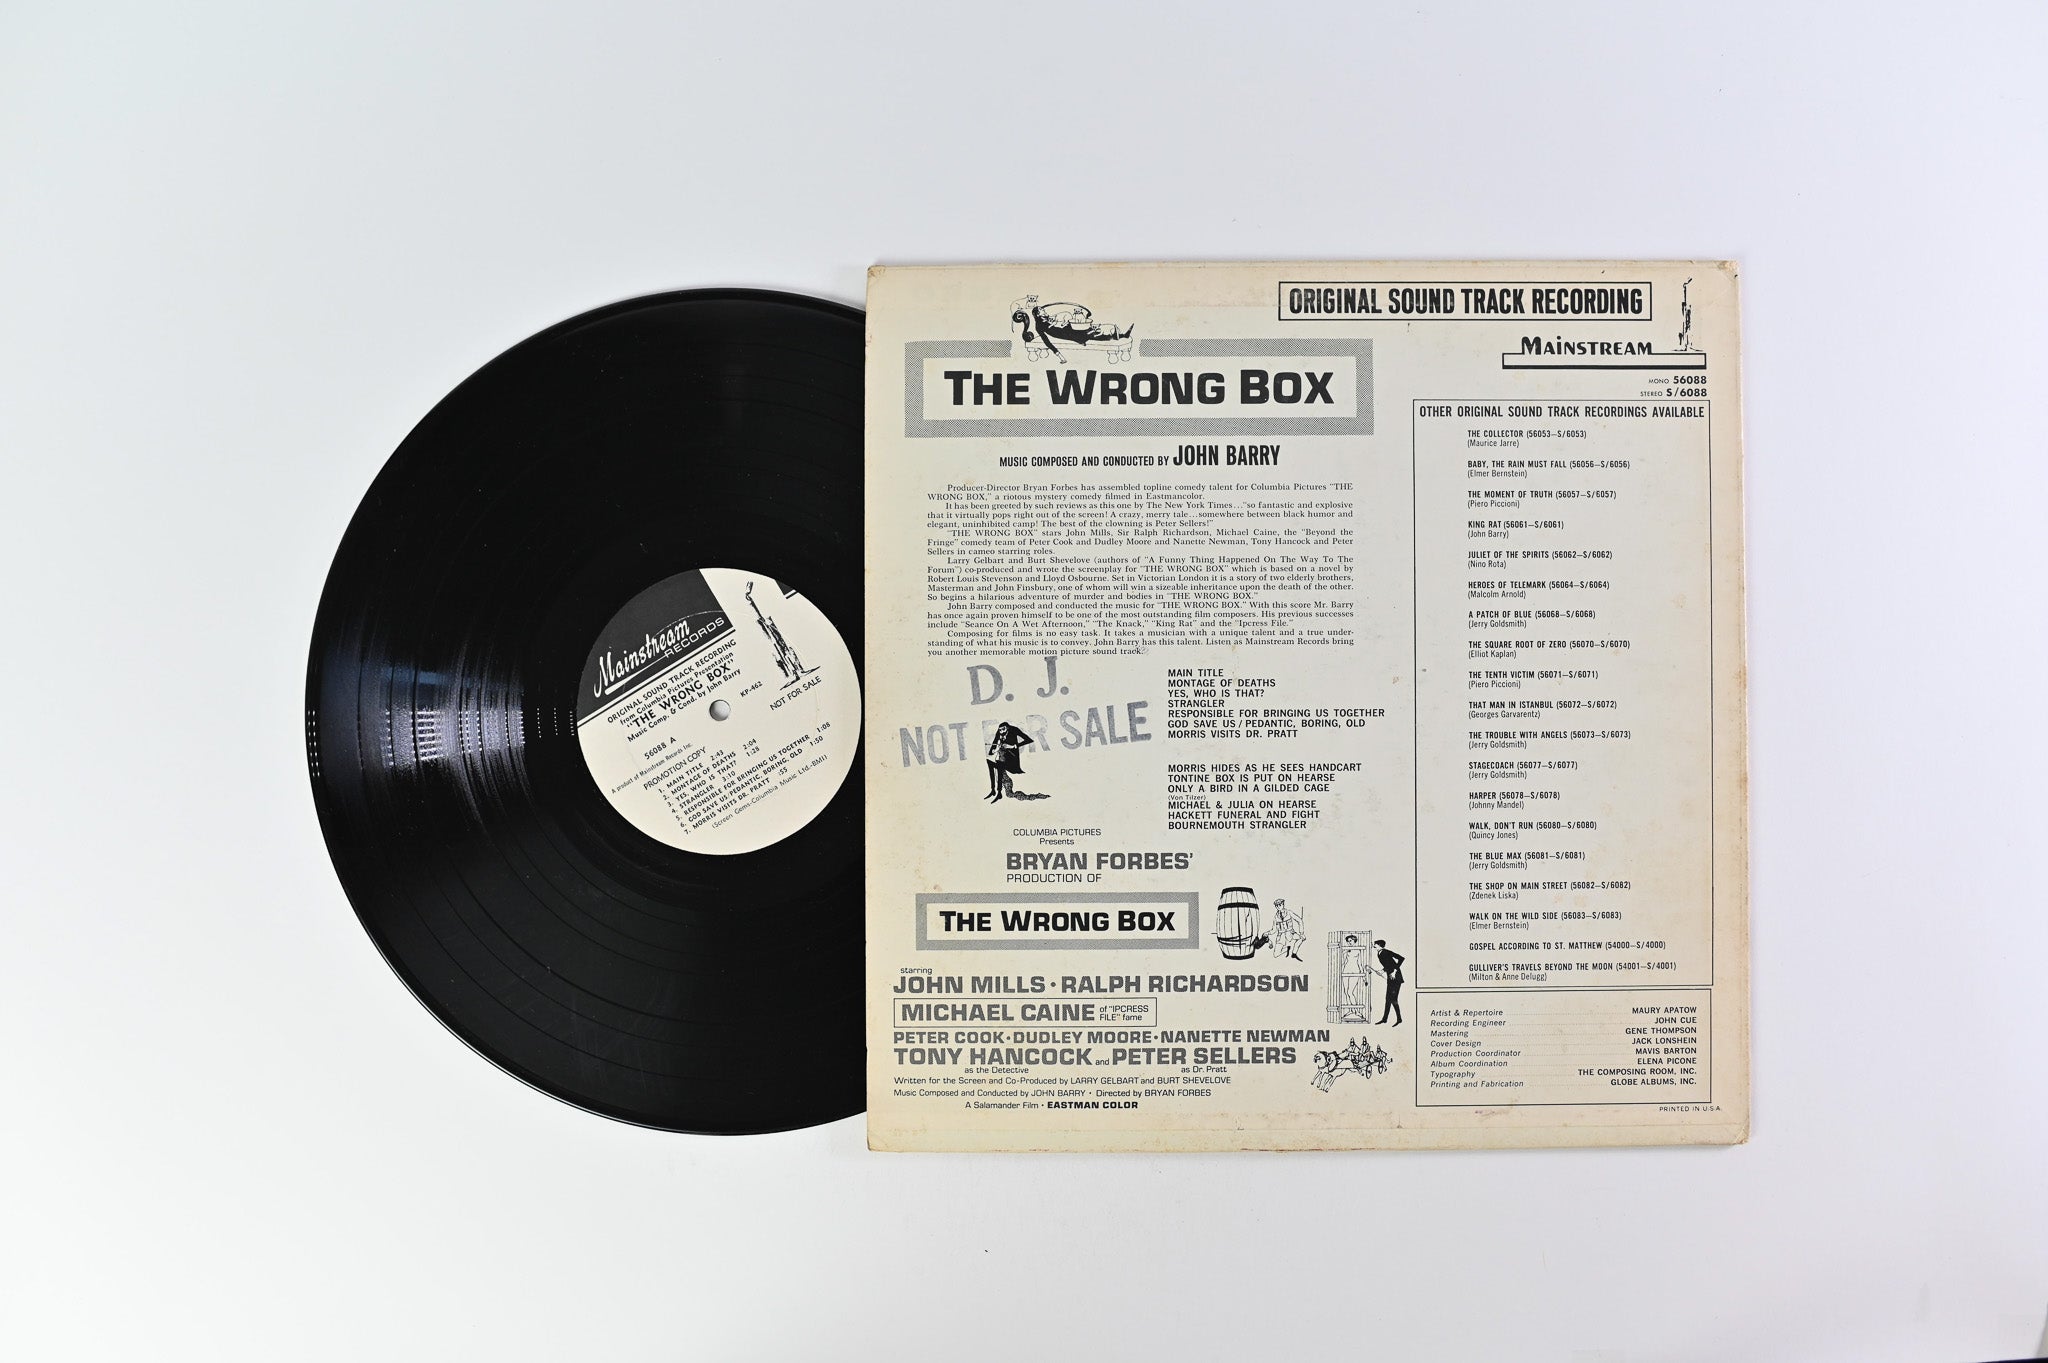 John Barry - The Wrong Box on Mainstream Records